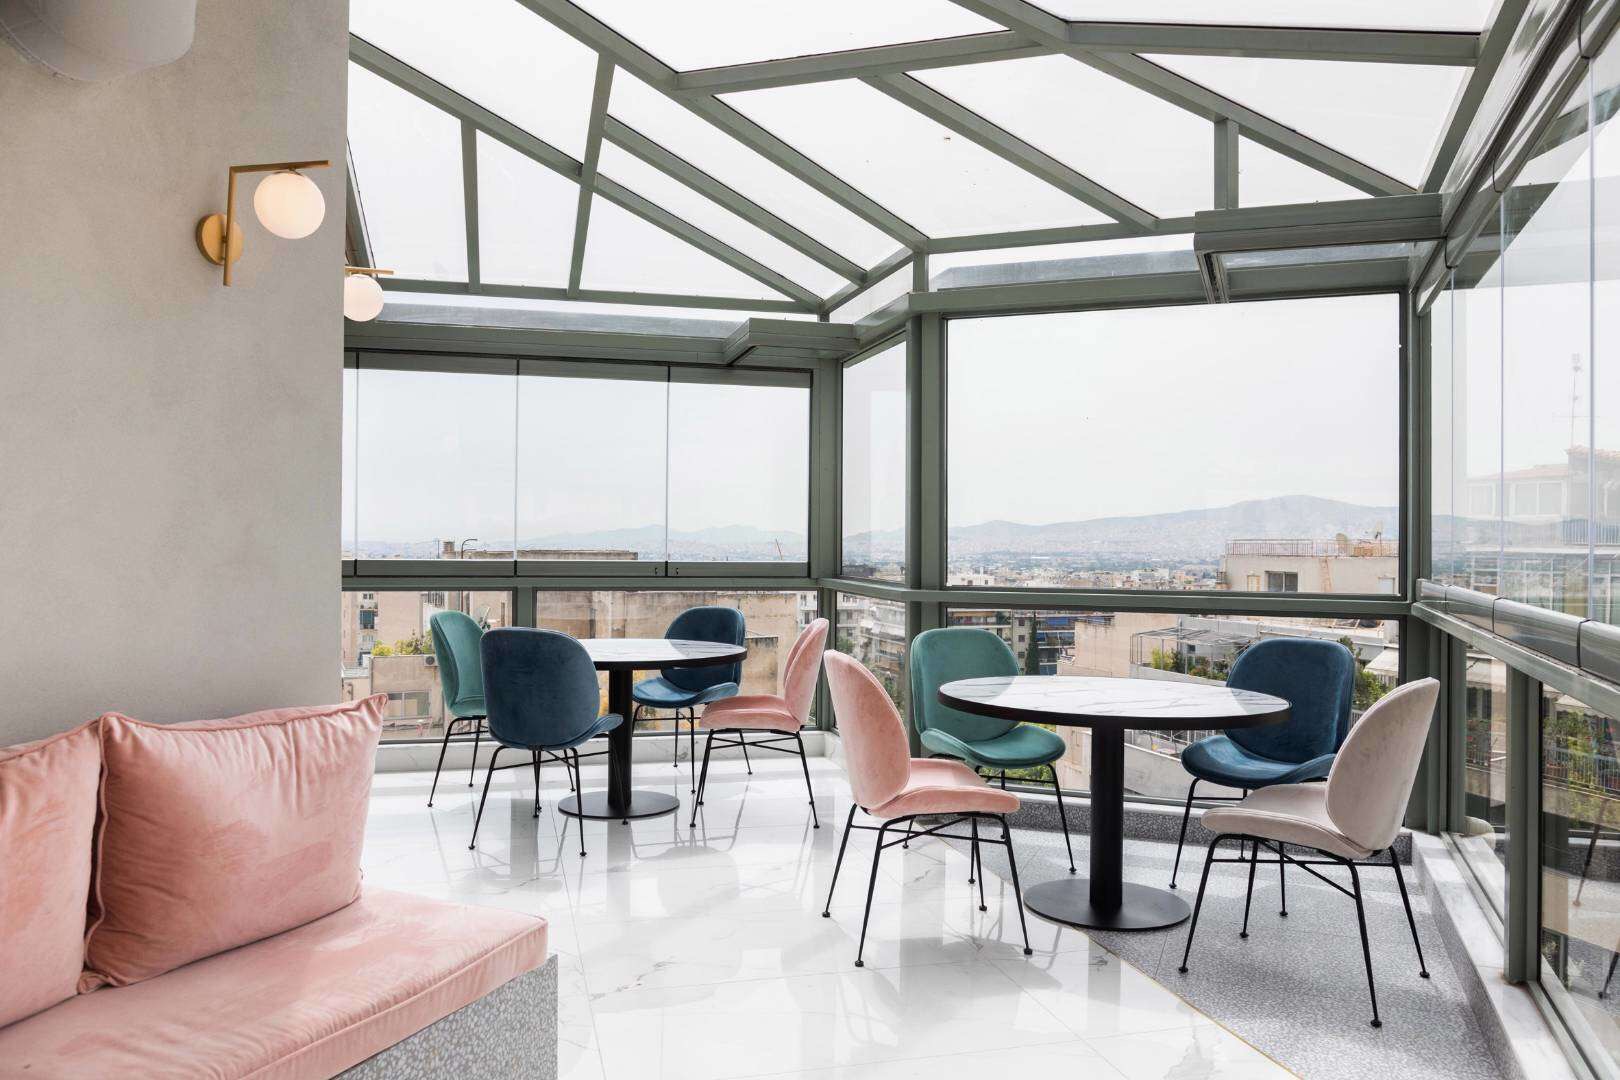 Fluo creates rooftop bar and breakfast room at Evripidis hot(图5)